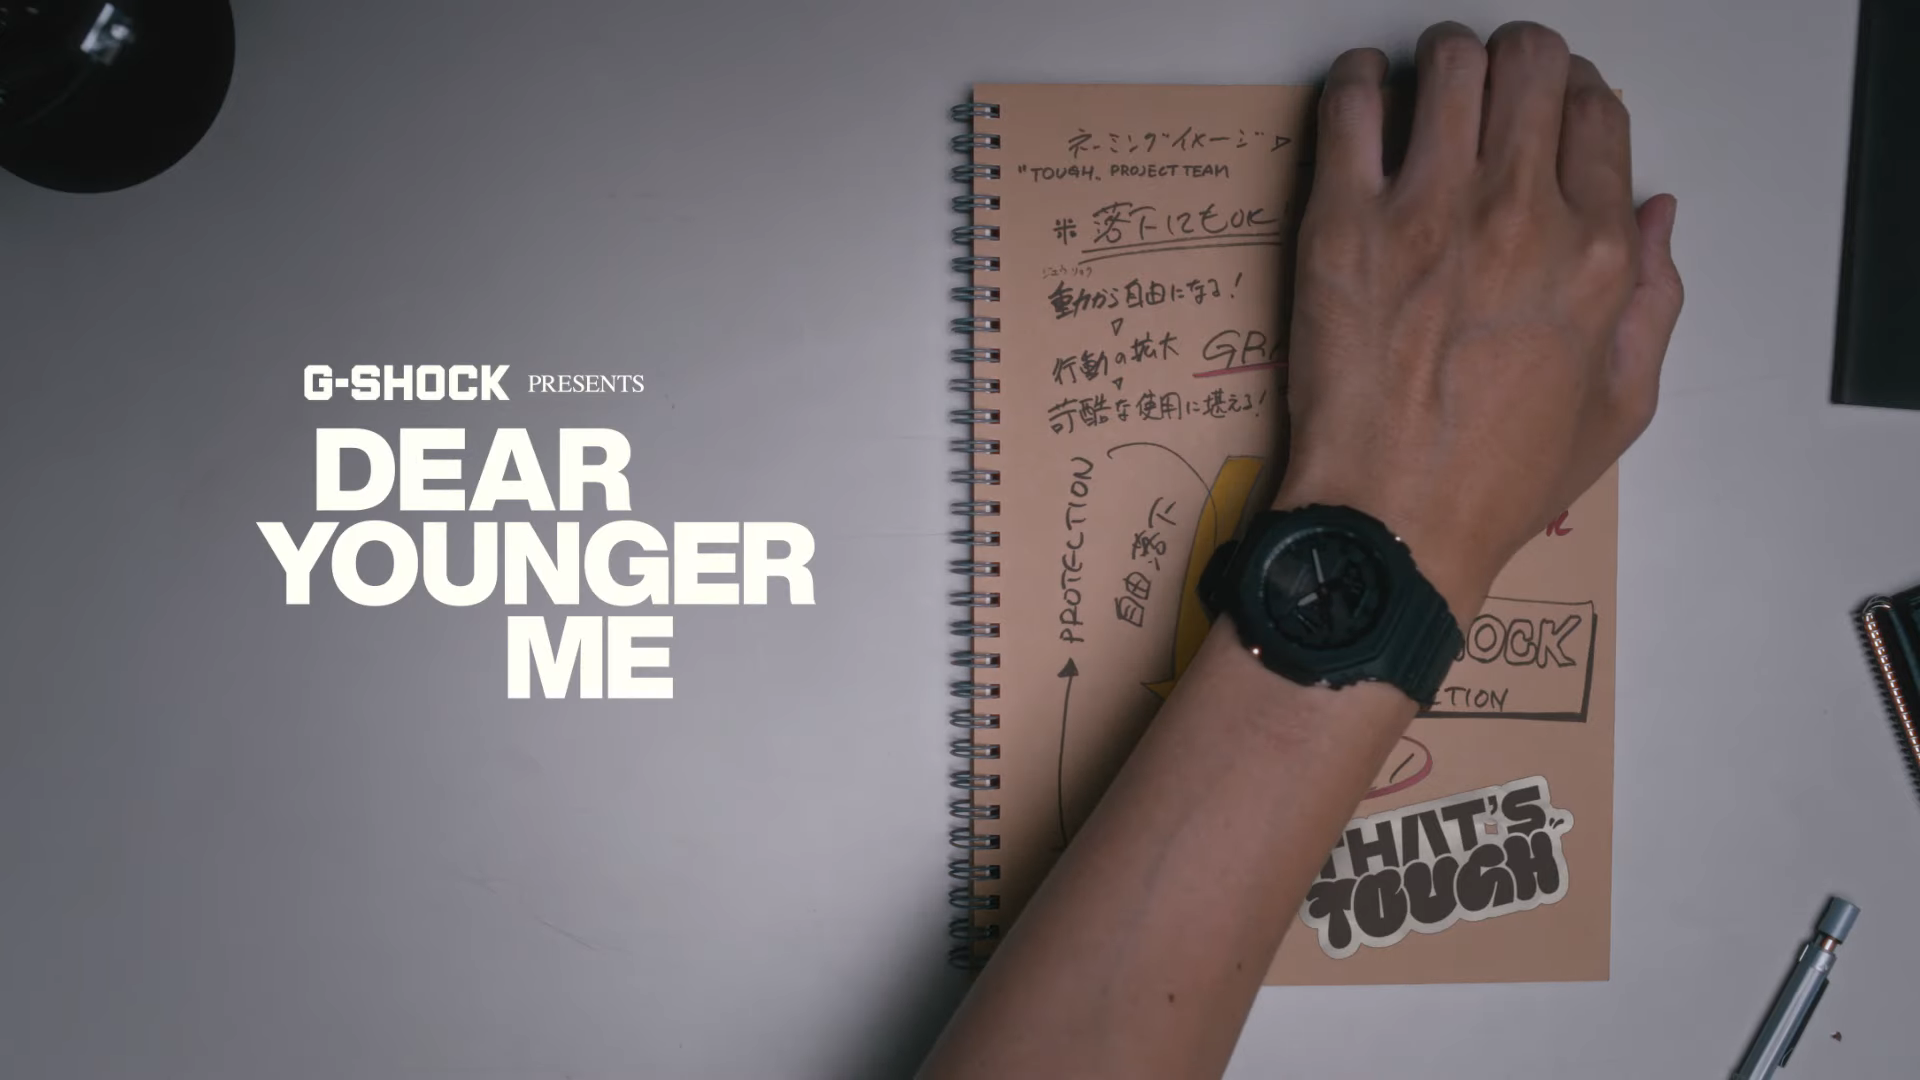 G-SHOCK 40th Anniversary “Dear Younger Me”